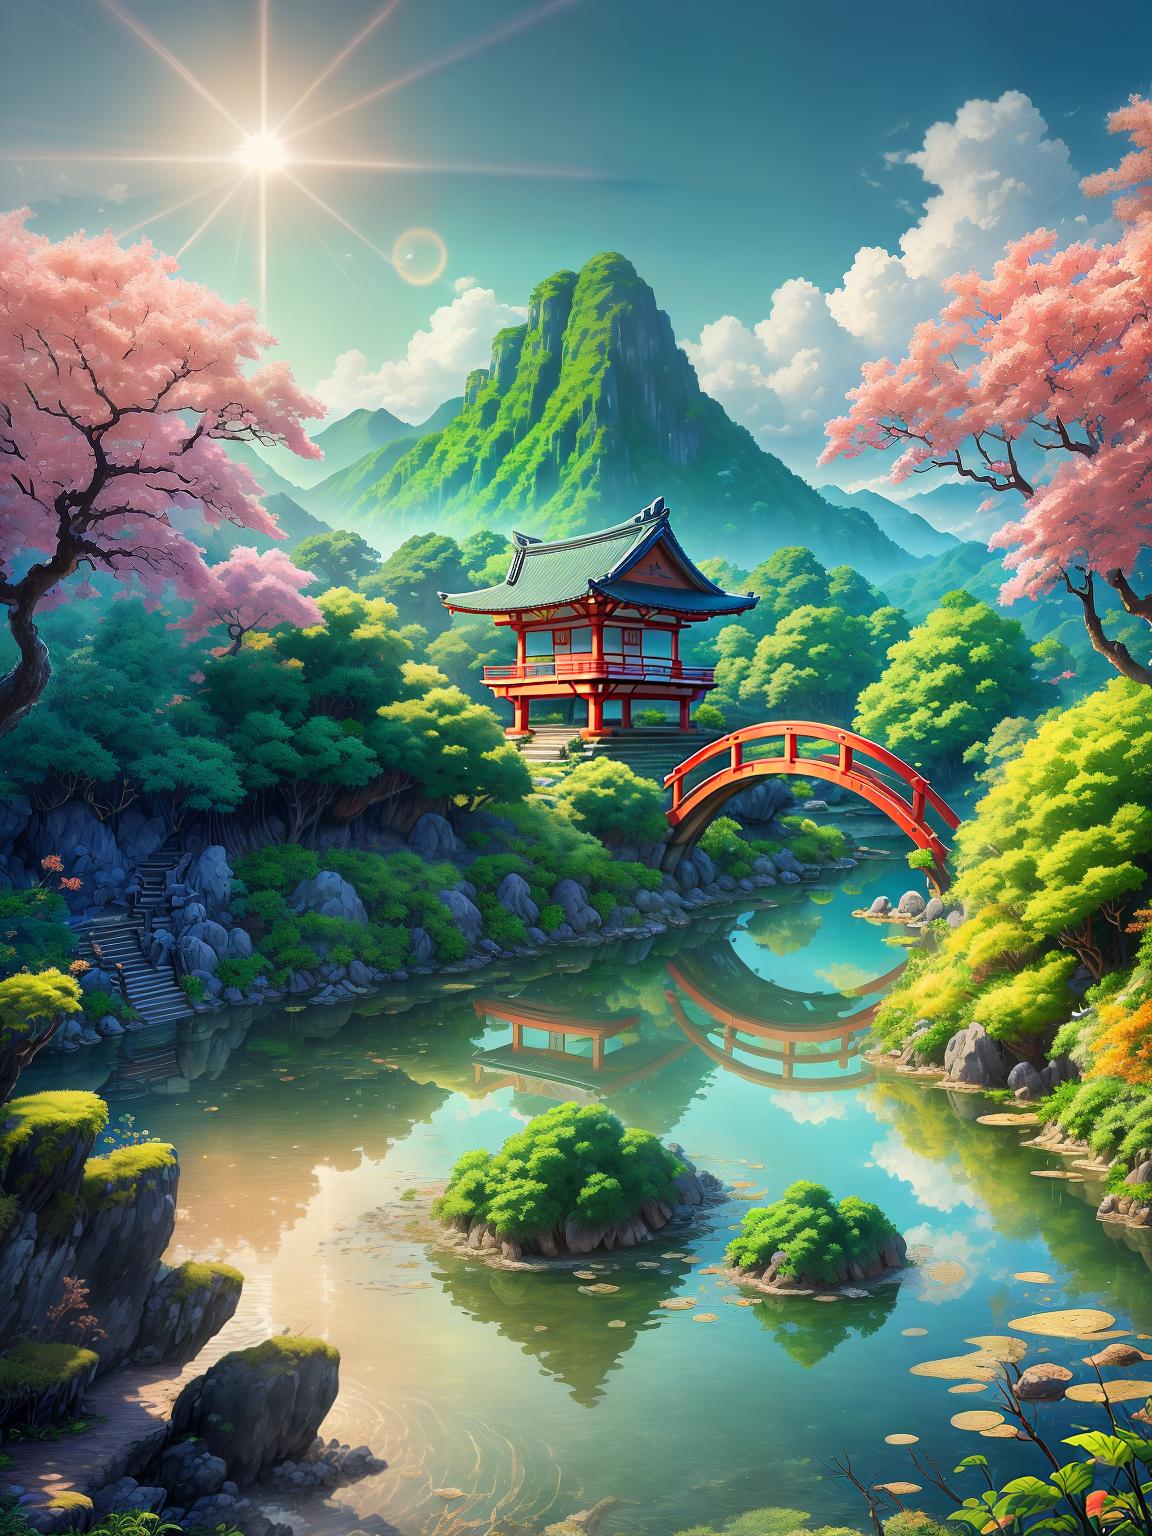  master piece, best quality, ultra detailed, highres, 4k.8k, A man, Raising the island of Shimane, Confident, BREAK Empowerment and natural beauty., Fields of Shimane, Green filter, energy drink bottles, rice fields, Torii gate, BREAK Serene and tranquil, Soft lighting, lens flare, vibrant colors, uplifting vibe, crystallineAI